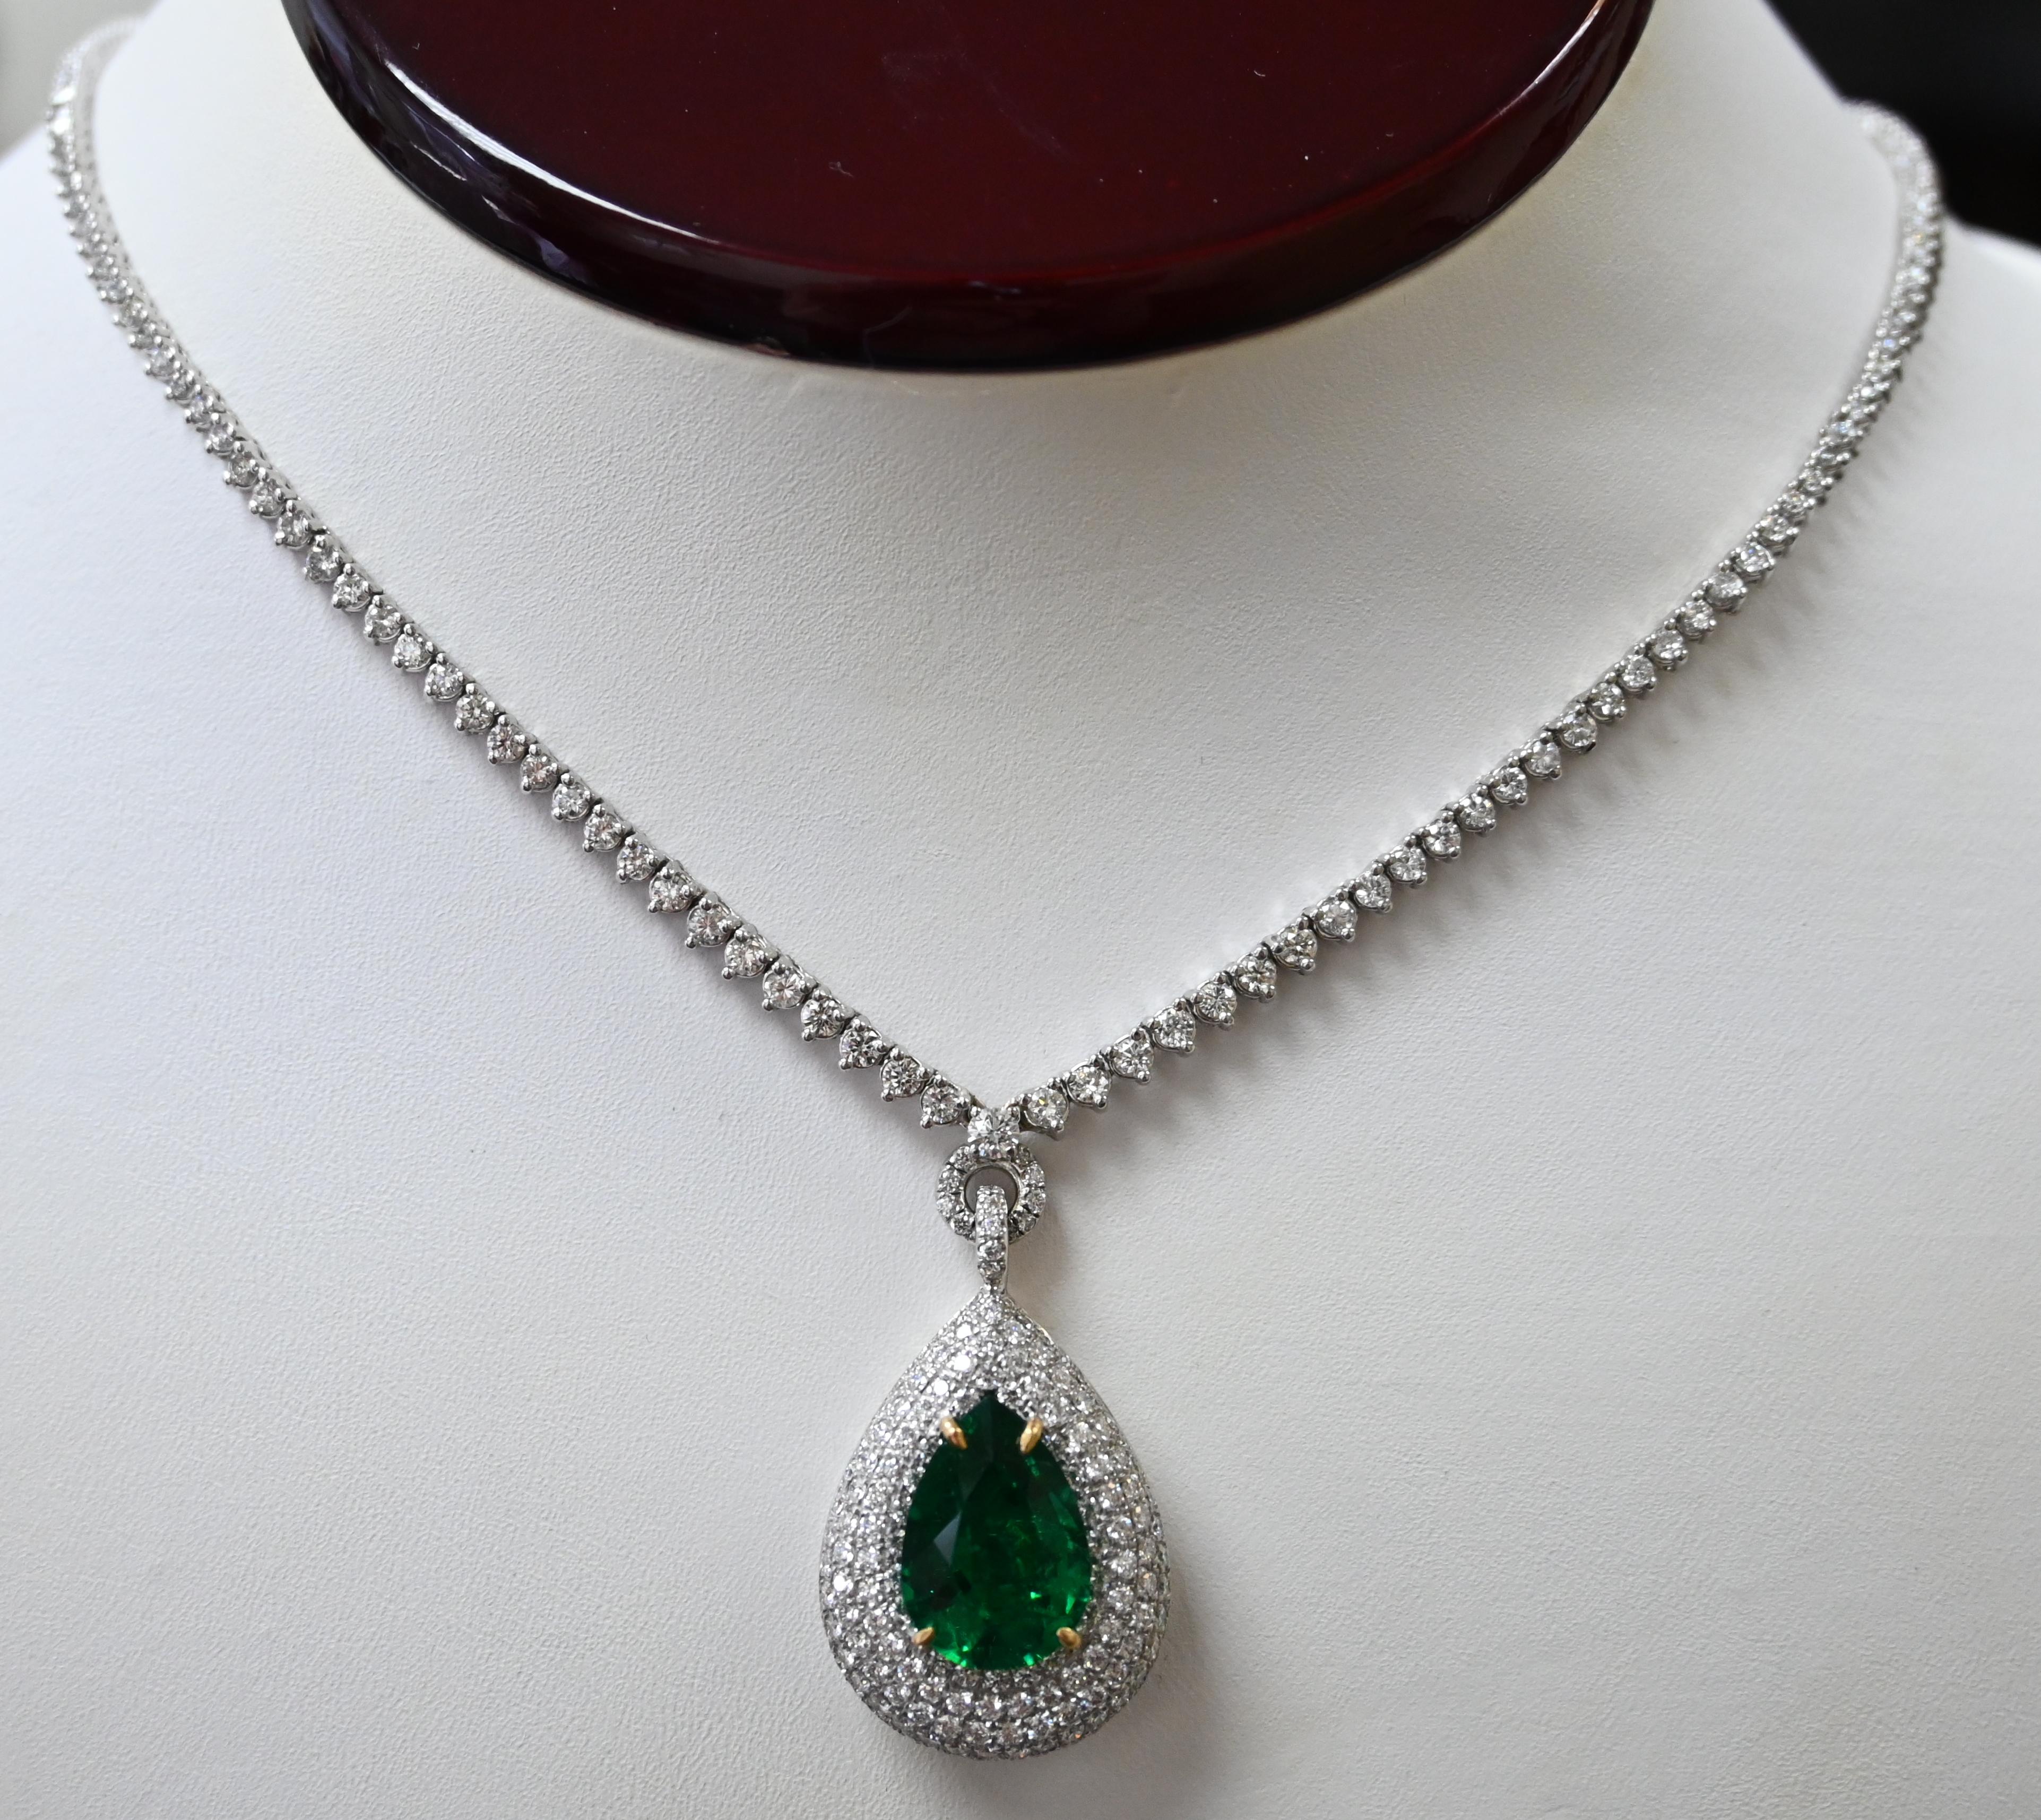 Magnum Creations original design features 6.50 carats of white diamonds and 5.57 carats of emerald, mounted on 18 karats of white gold.

This is a One-Of-A-Kind piece, the center emerald holds a unique, deep and rich color like no other.